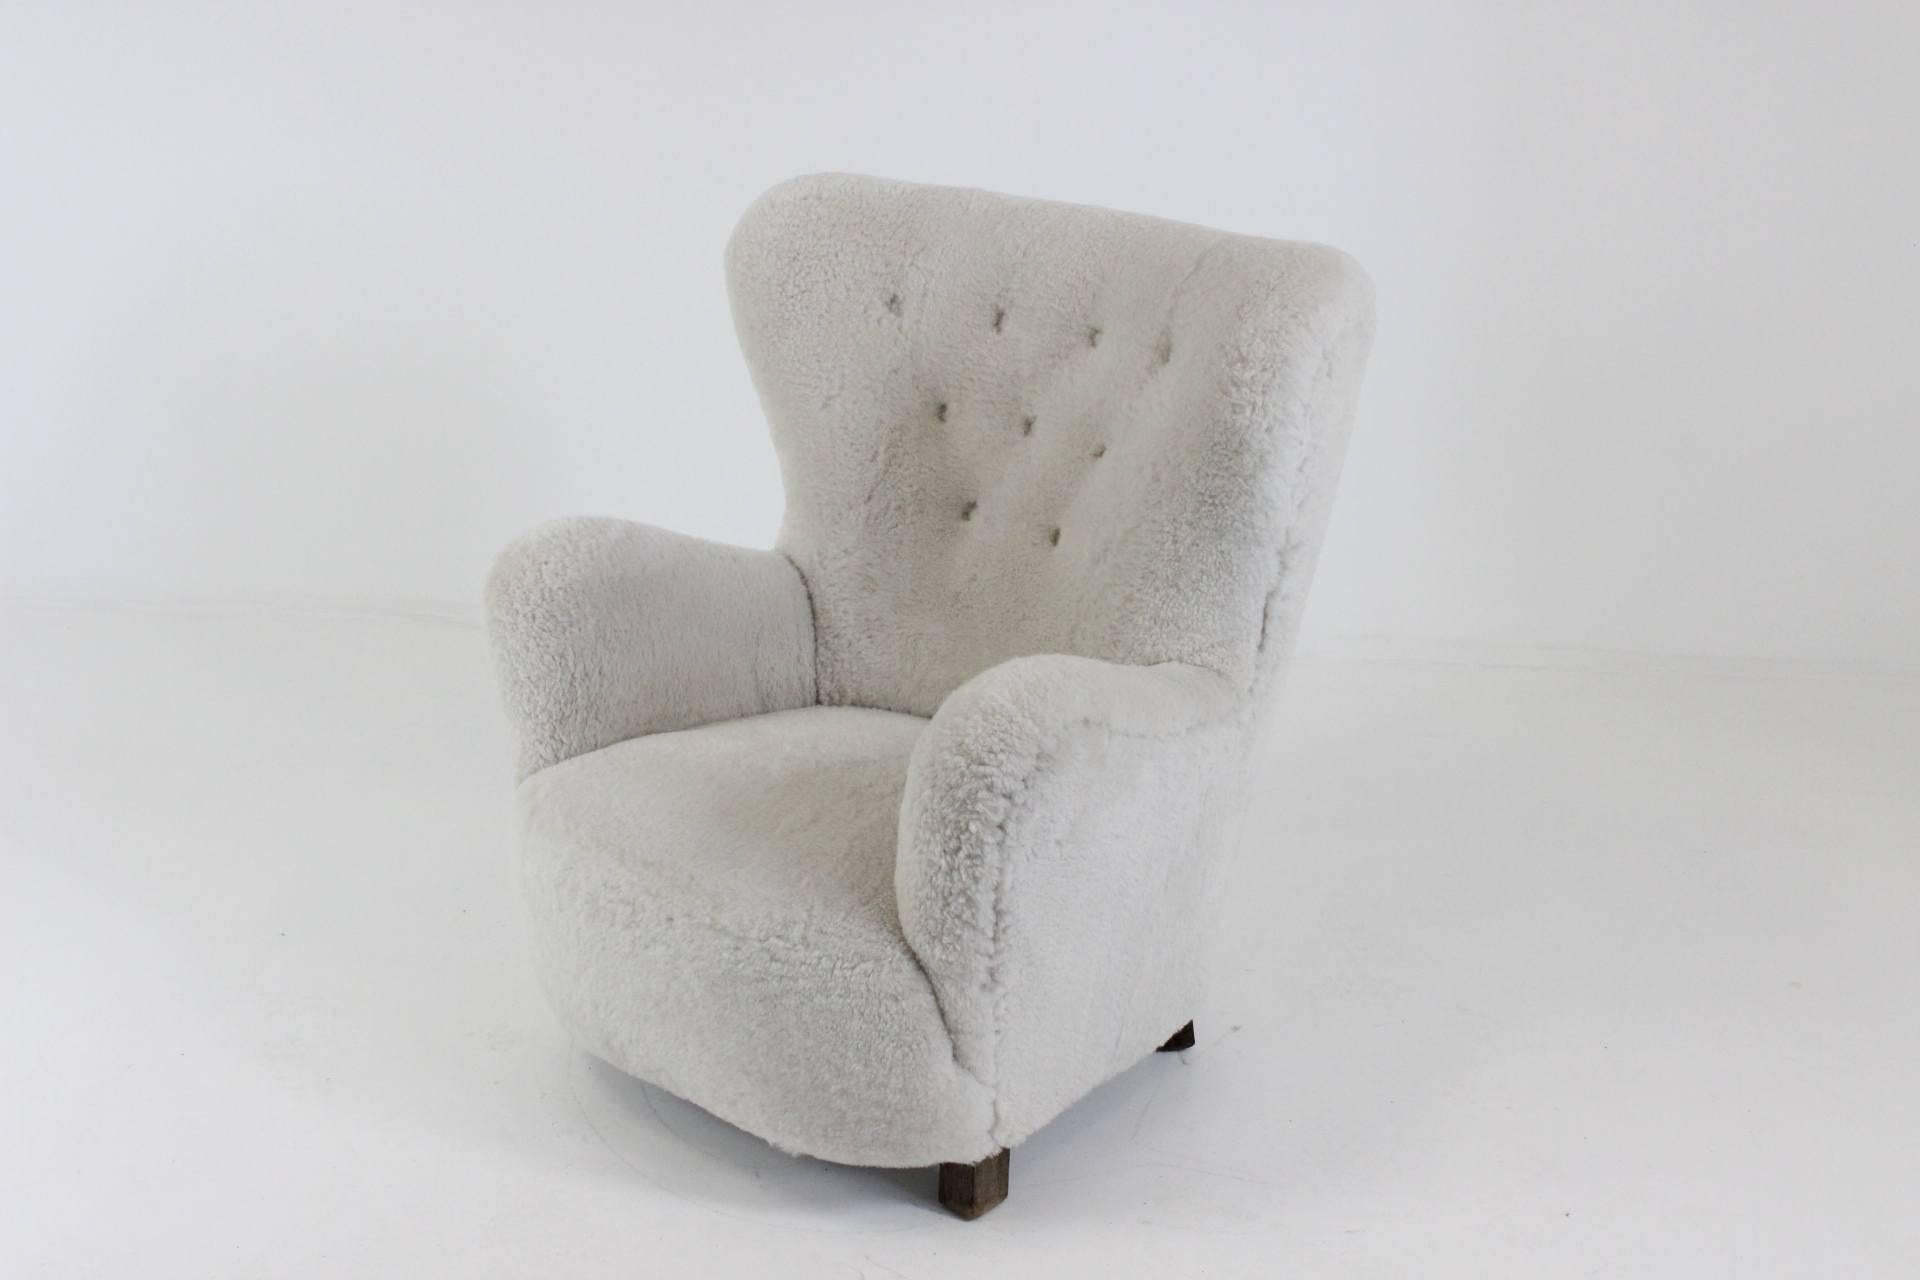 Beautiful Scandinavian wingback chair in sheepskin upholstery.
The sheepskin were carefully selected and their weren't chemically treated (to be more white).